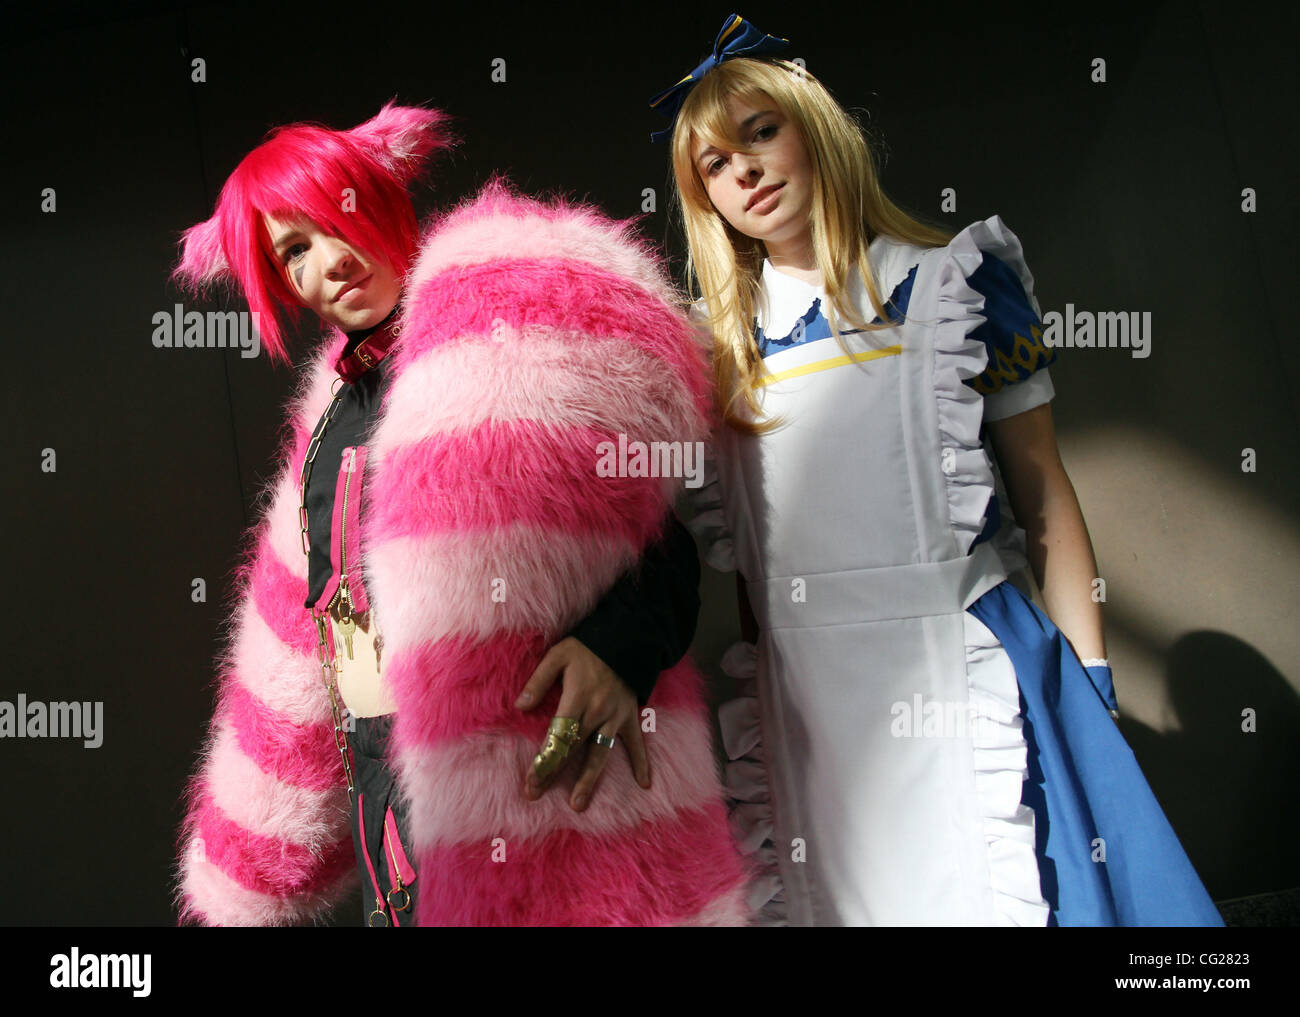 Otakuthon participants pose for a picture during the Otakuthon Anime Convention at Palais des congrès, Montreal. Otakuthon is Quebec's largest anime convention promoting Japanese animation (anime), Japanese graphic novels (manga), related gaming and Japanese pop-culture Stock Photo